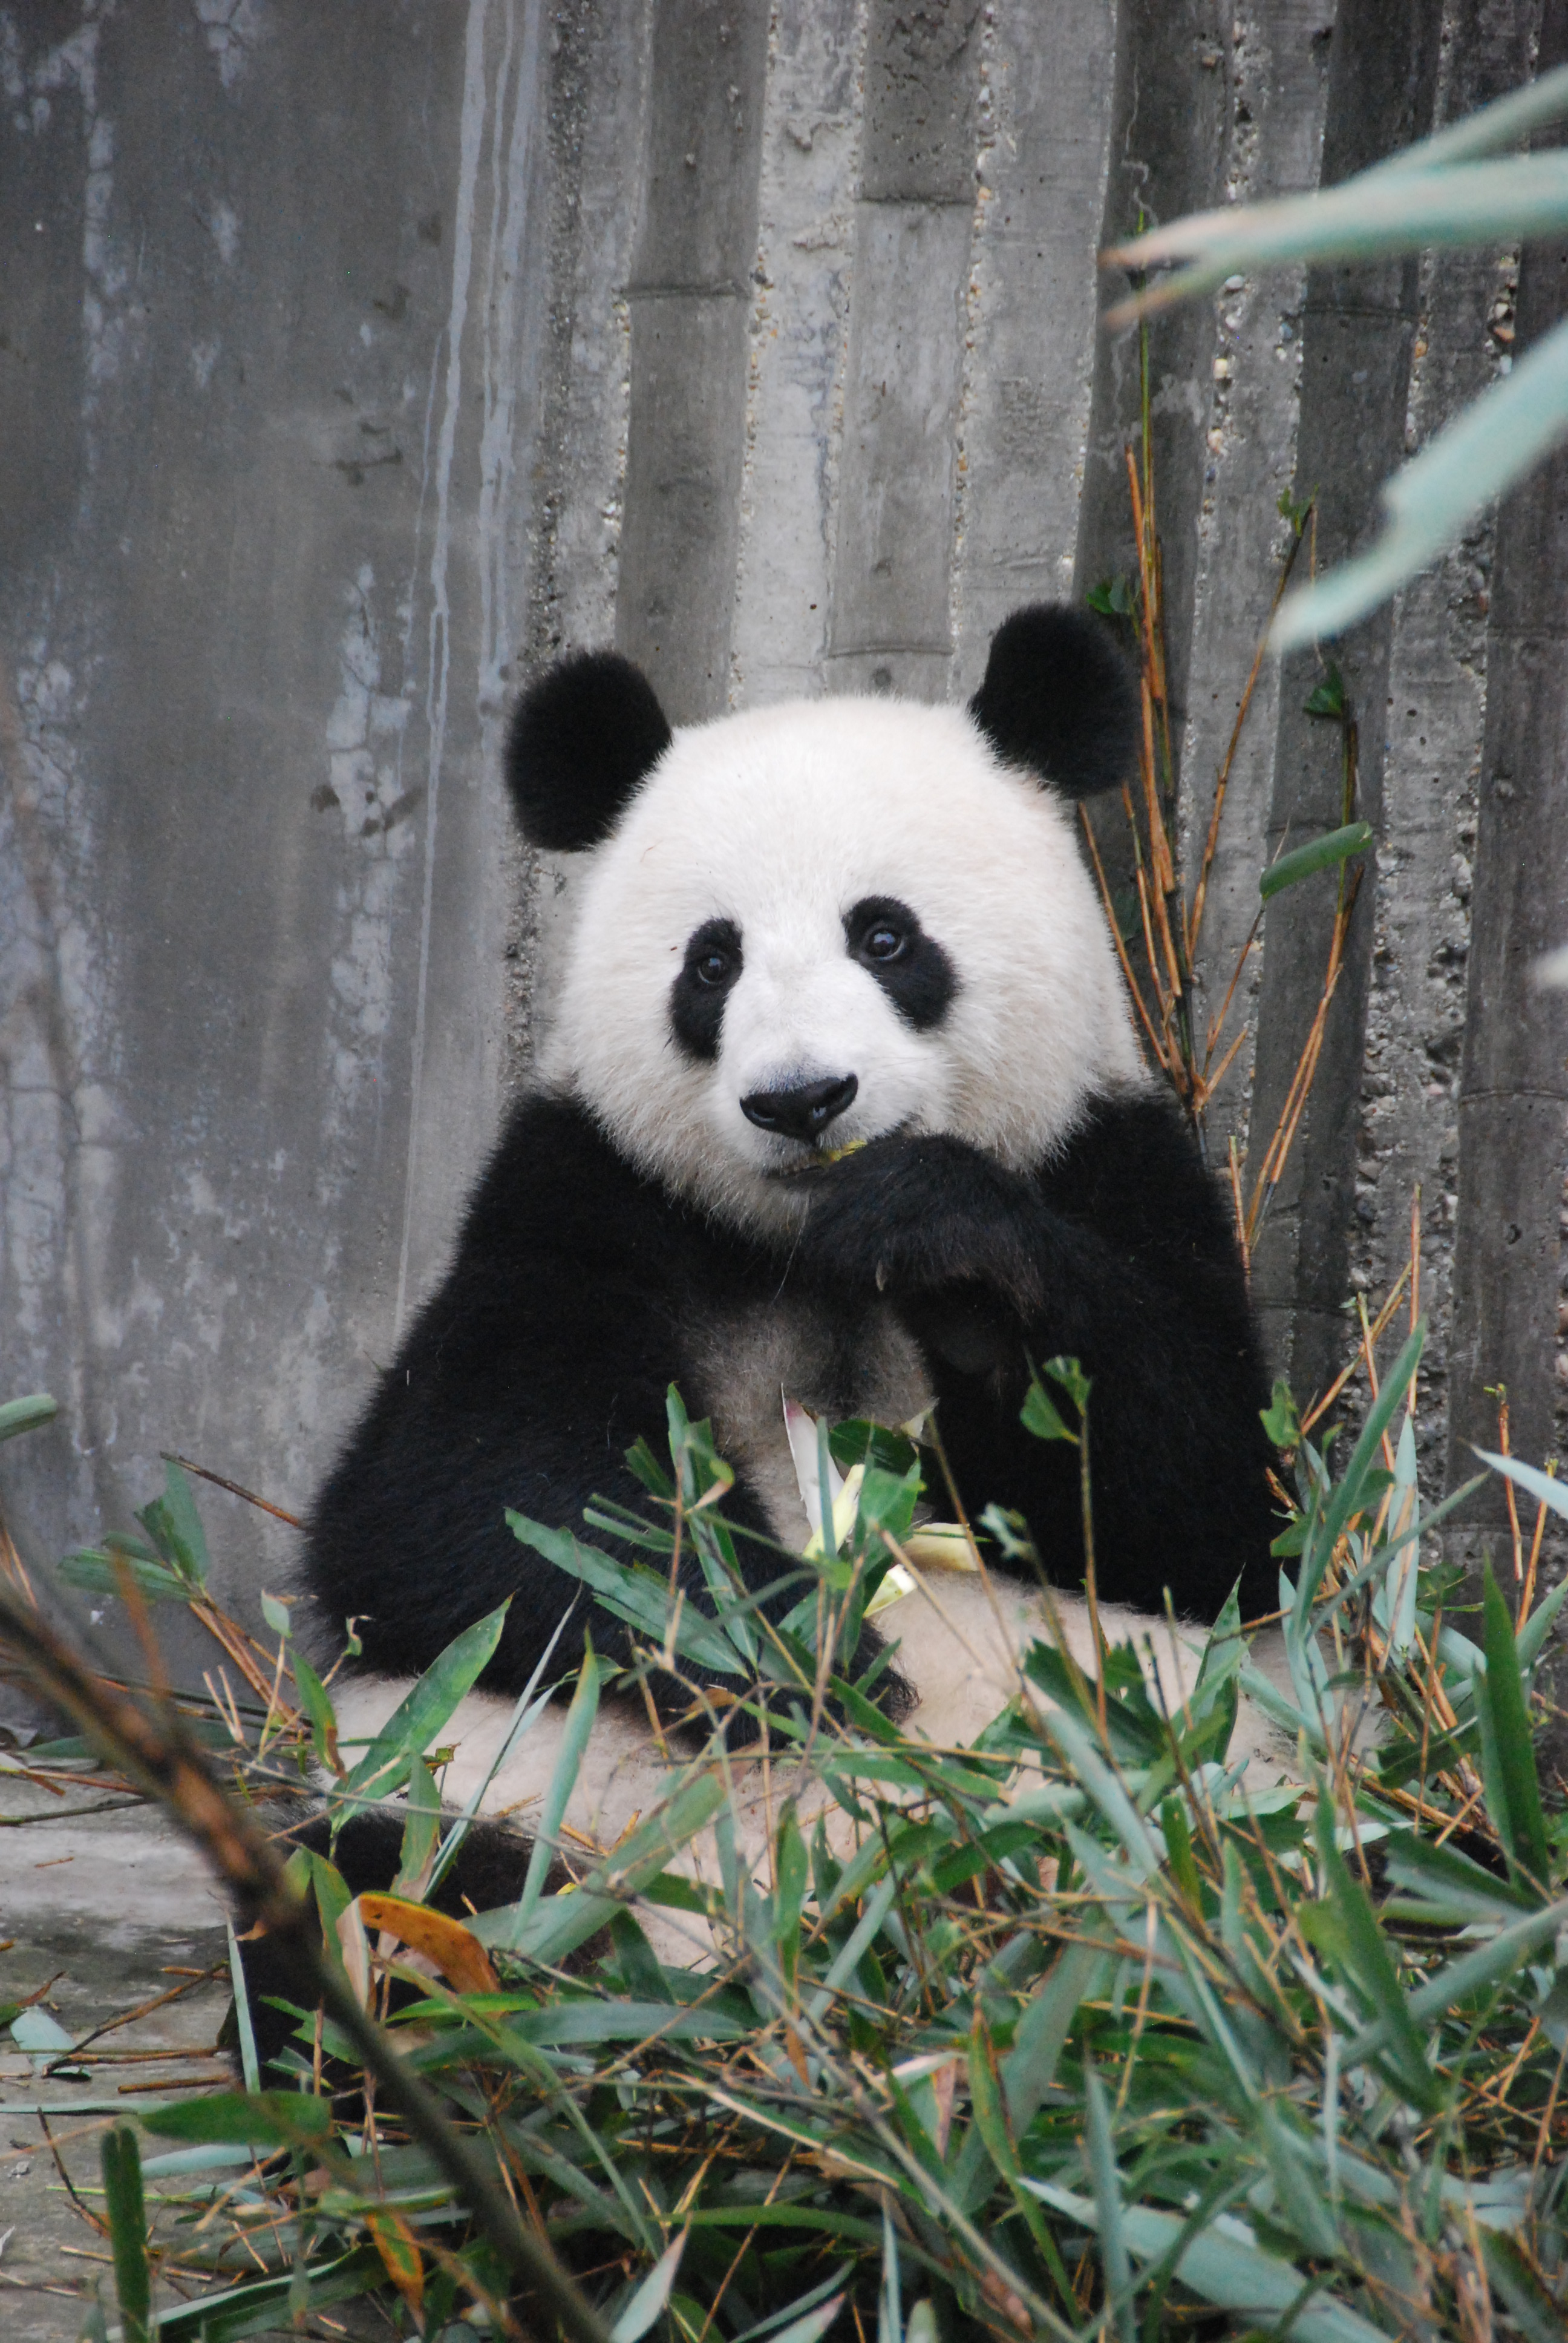 Panda eating bamboo - Image Compliment of Laura The Explaura 